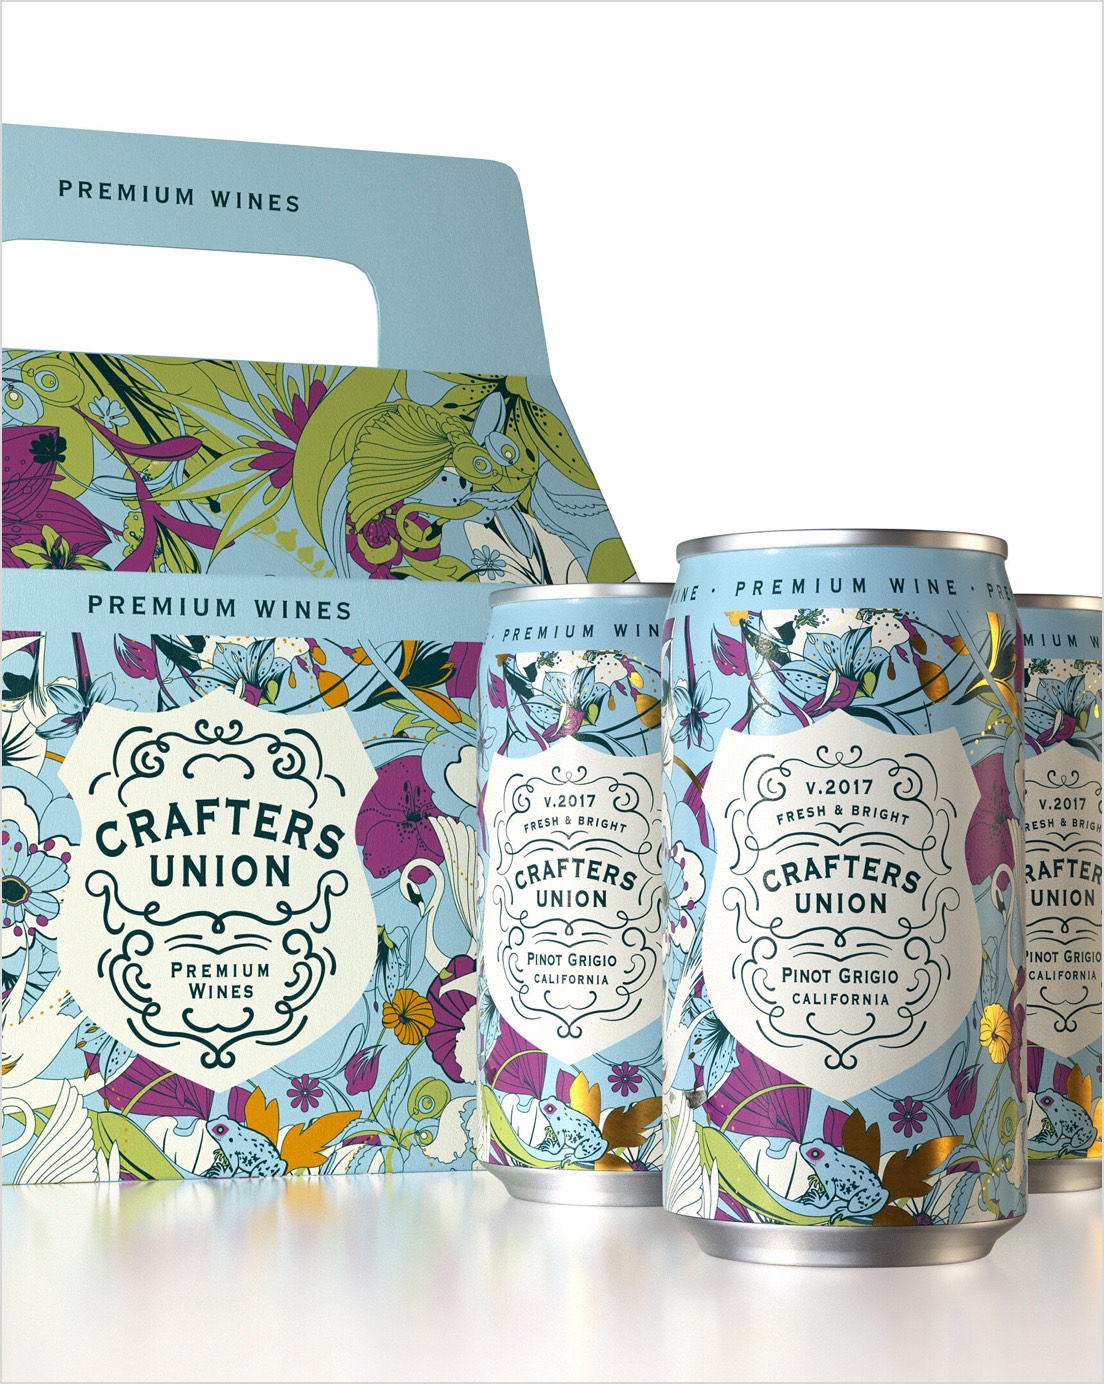 Photograph of Crafters Union beer packaging.